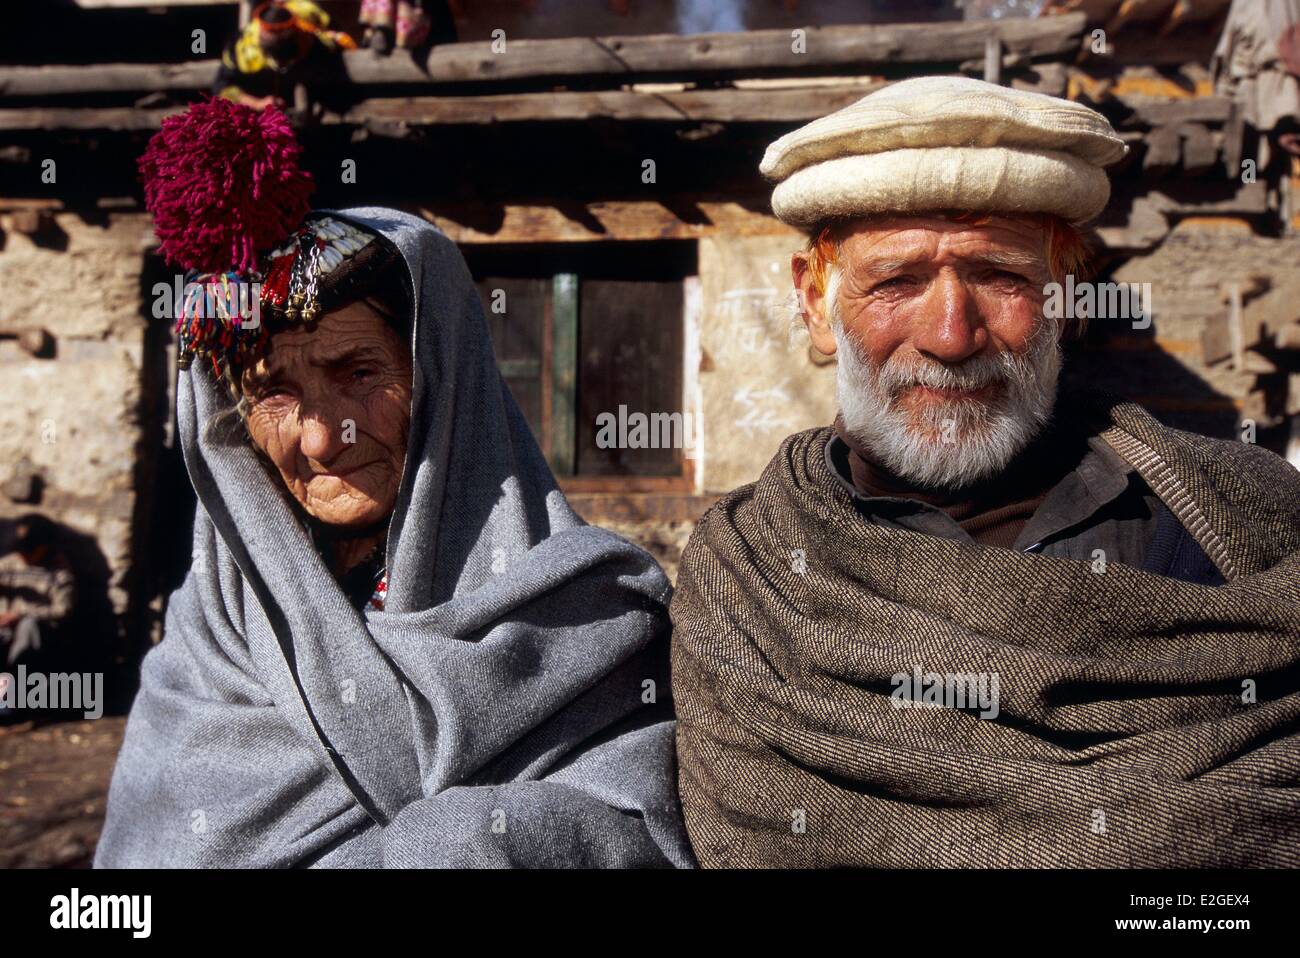 Pakistan Khyber Pakhtunkhwa Kalash valleys Bumburet valley elderly Couple wrapped in their winter shawl a bearded Kalash man and a man who is in mourning for a close family member he will shave his beard off a month after death at which point mourning per Stock Photo